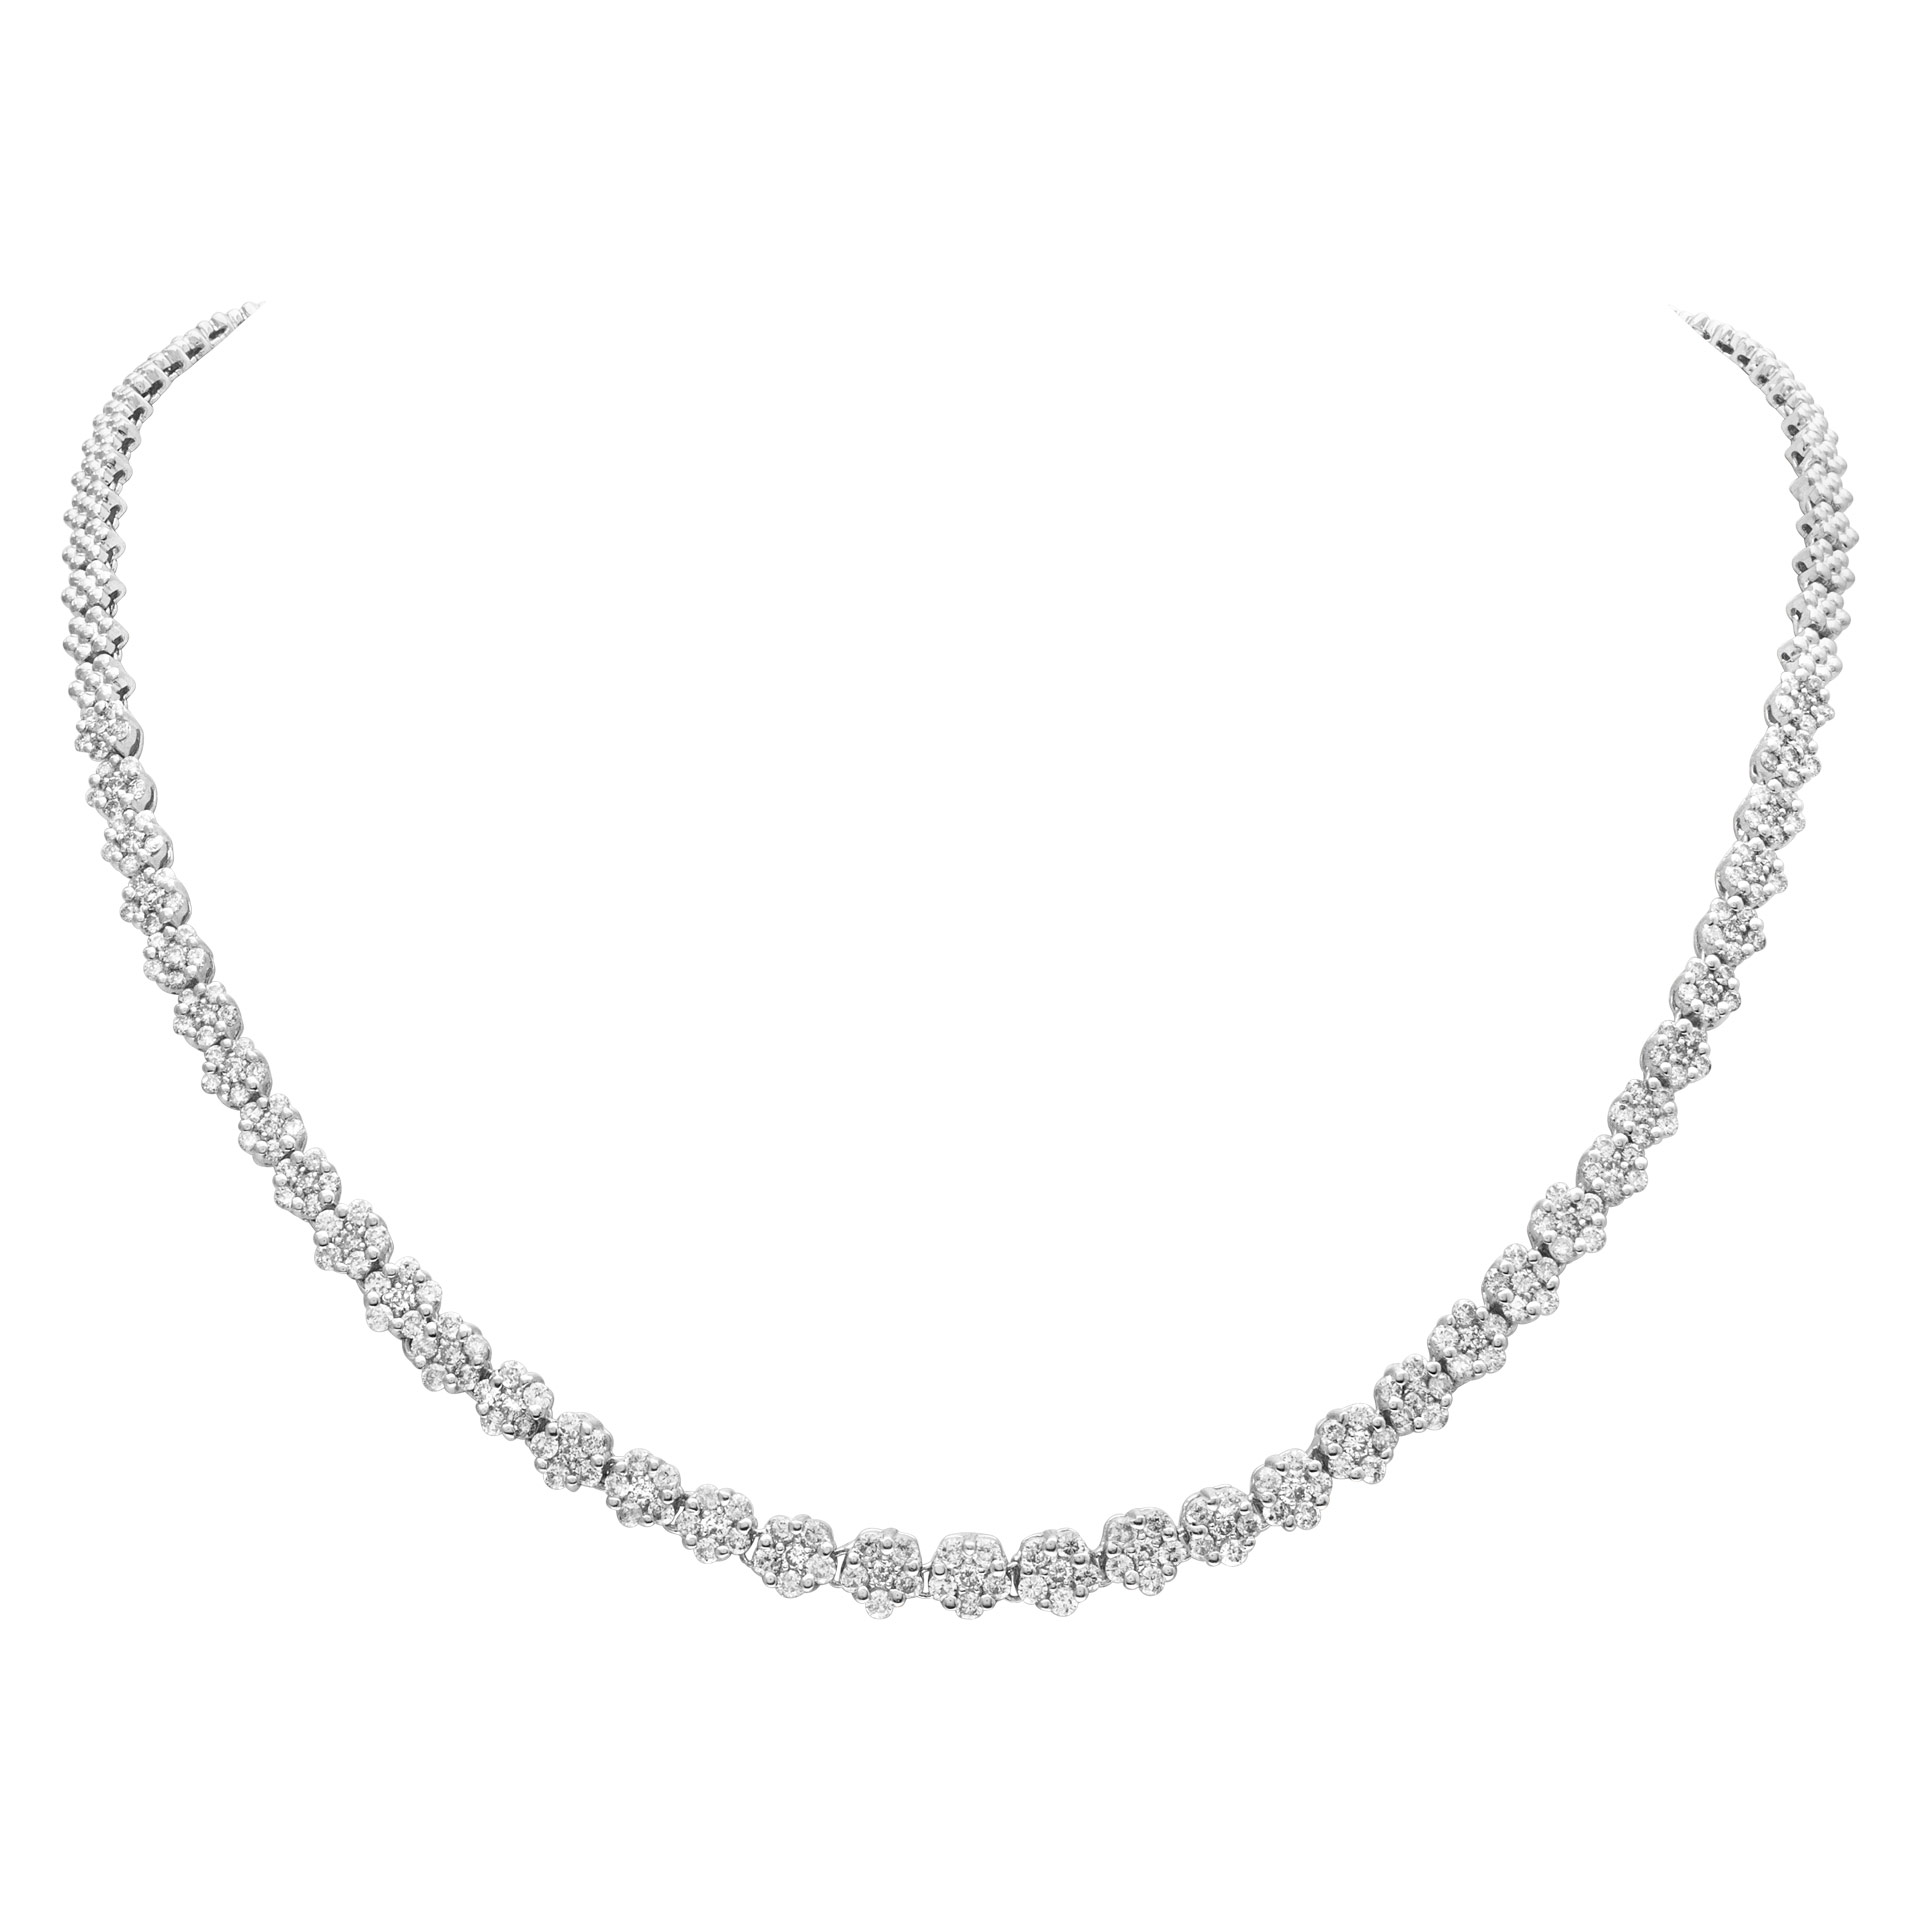 Flower design diamond necklace in 14k white gold. 4.00cts in round brilliant dia's image 1